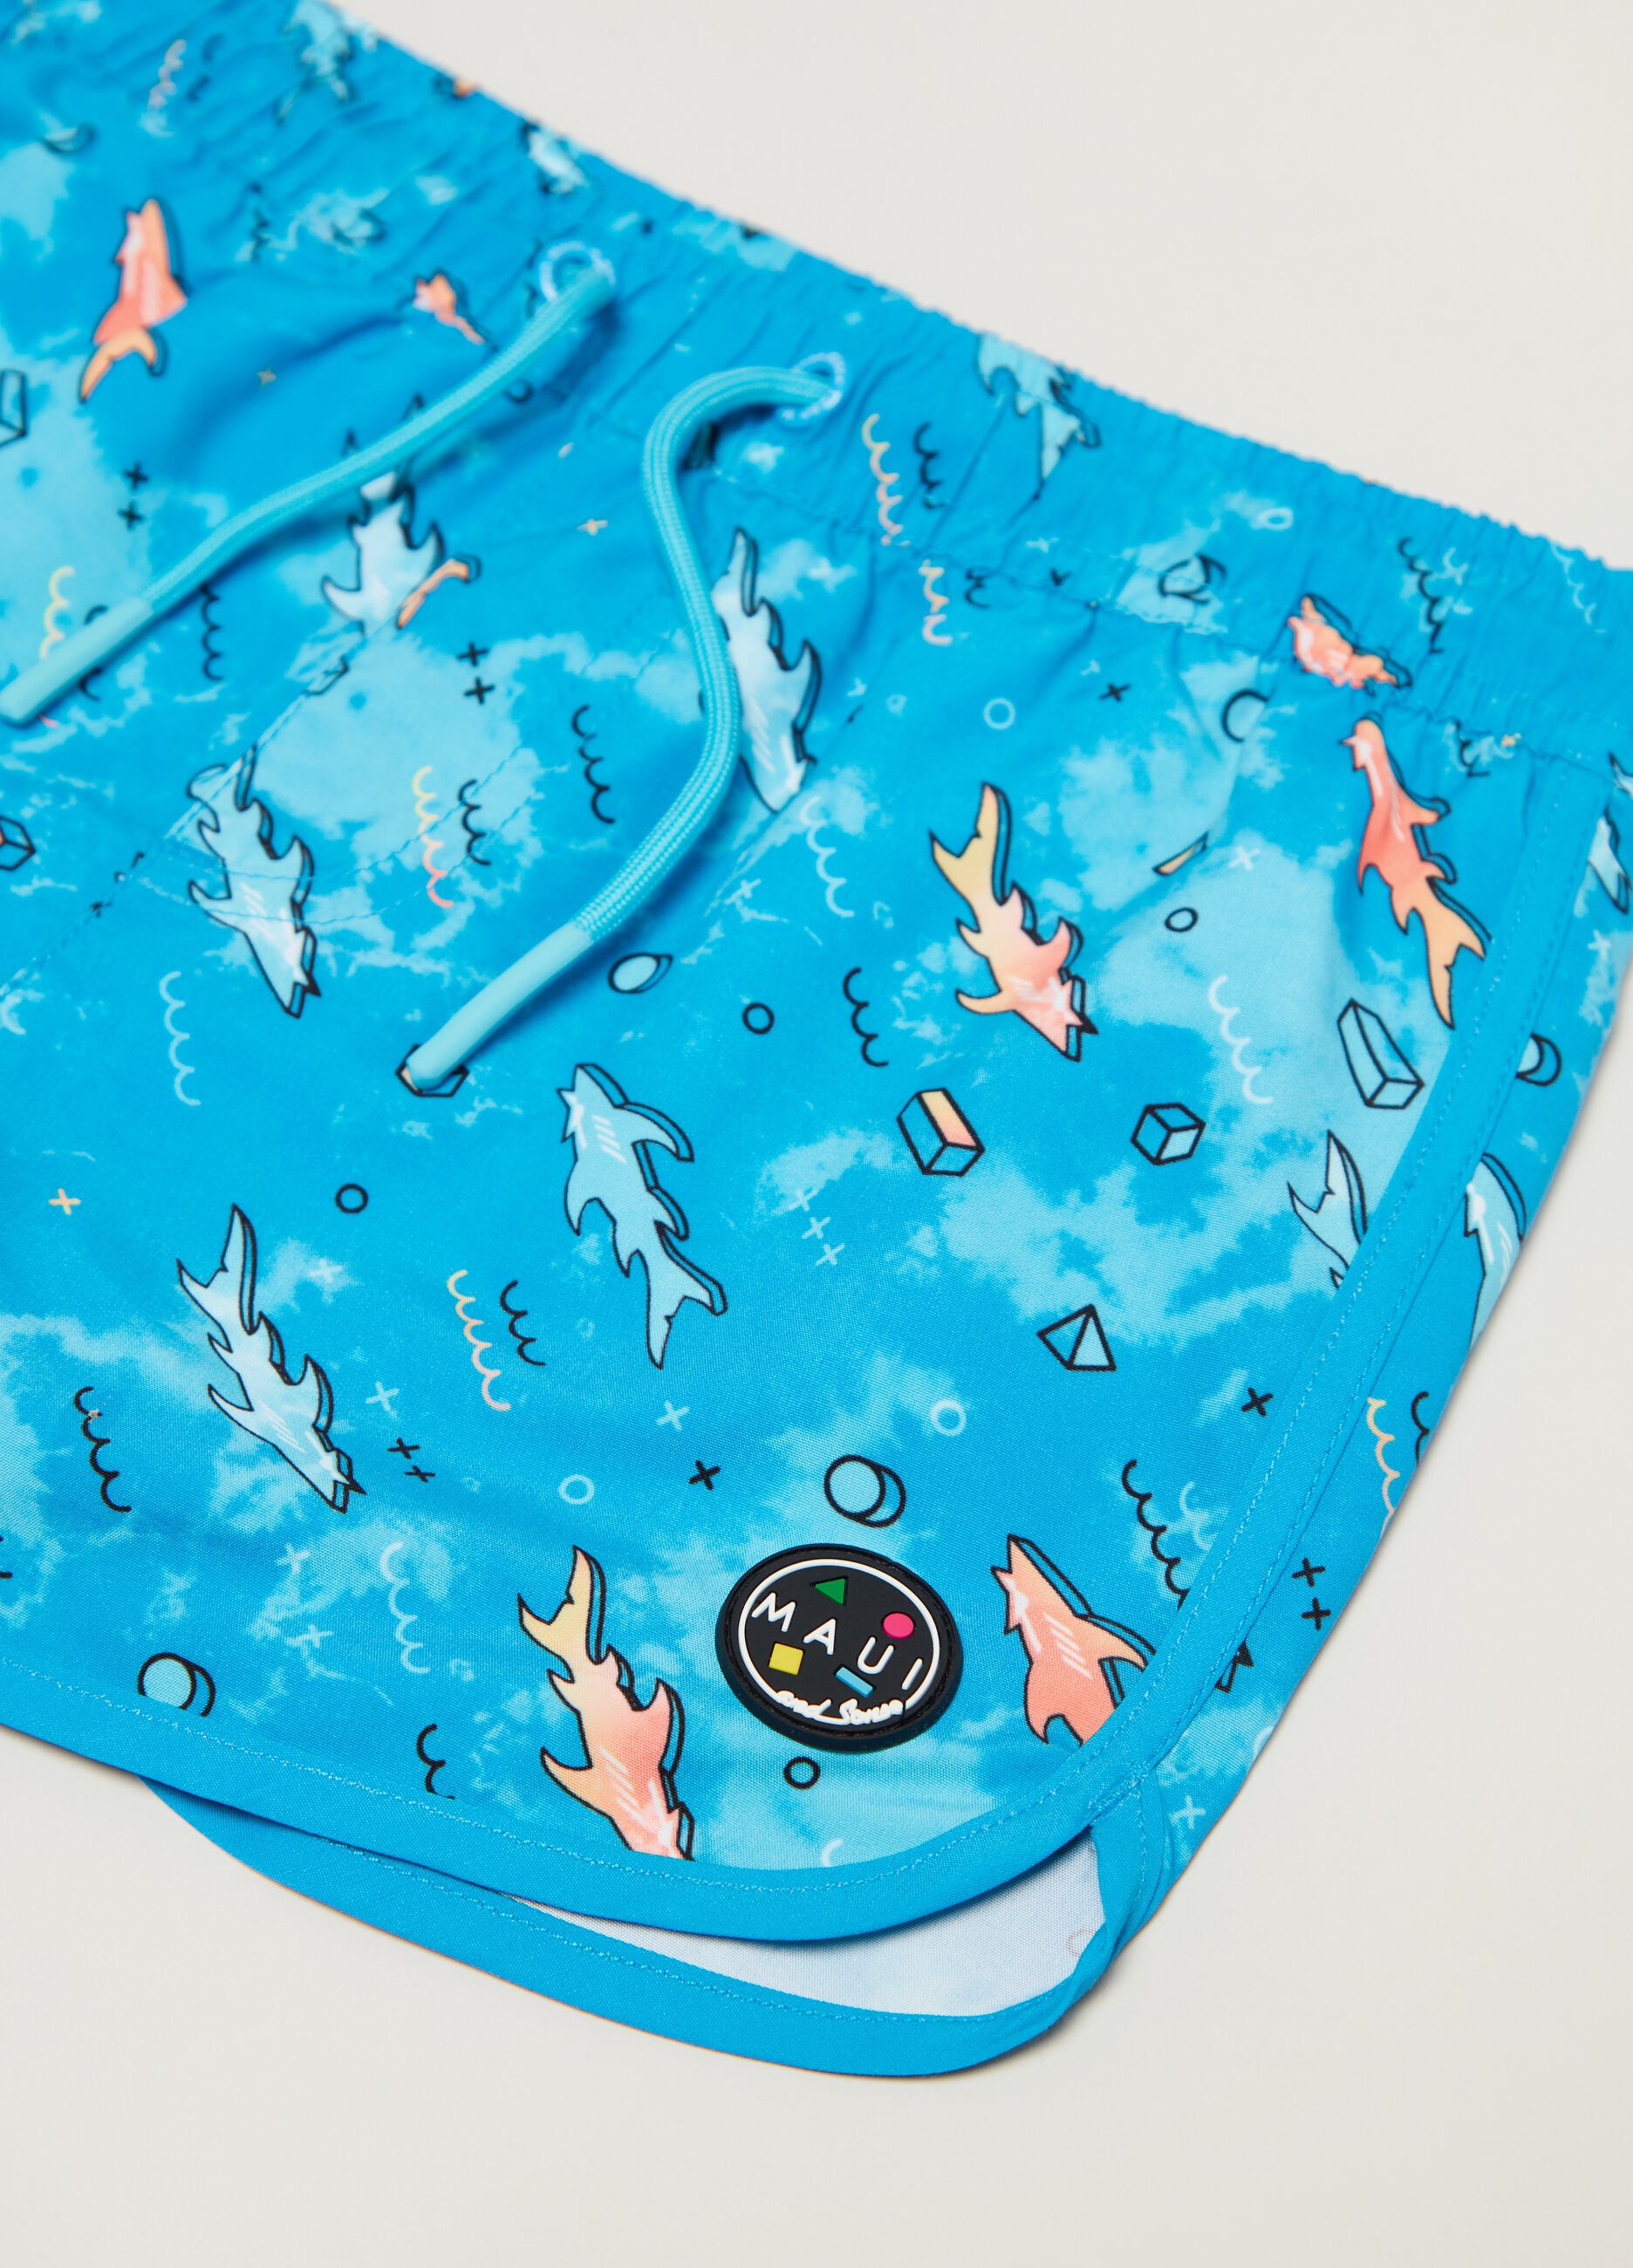 Maui and Sons swimming trunks with sharks print